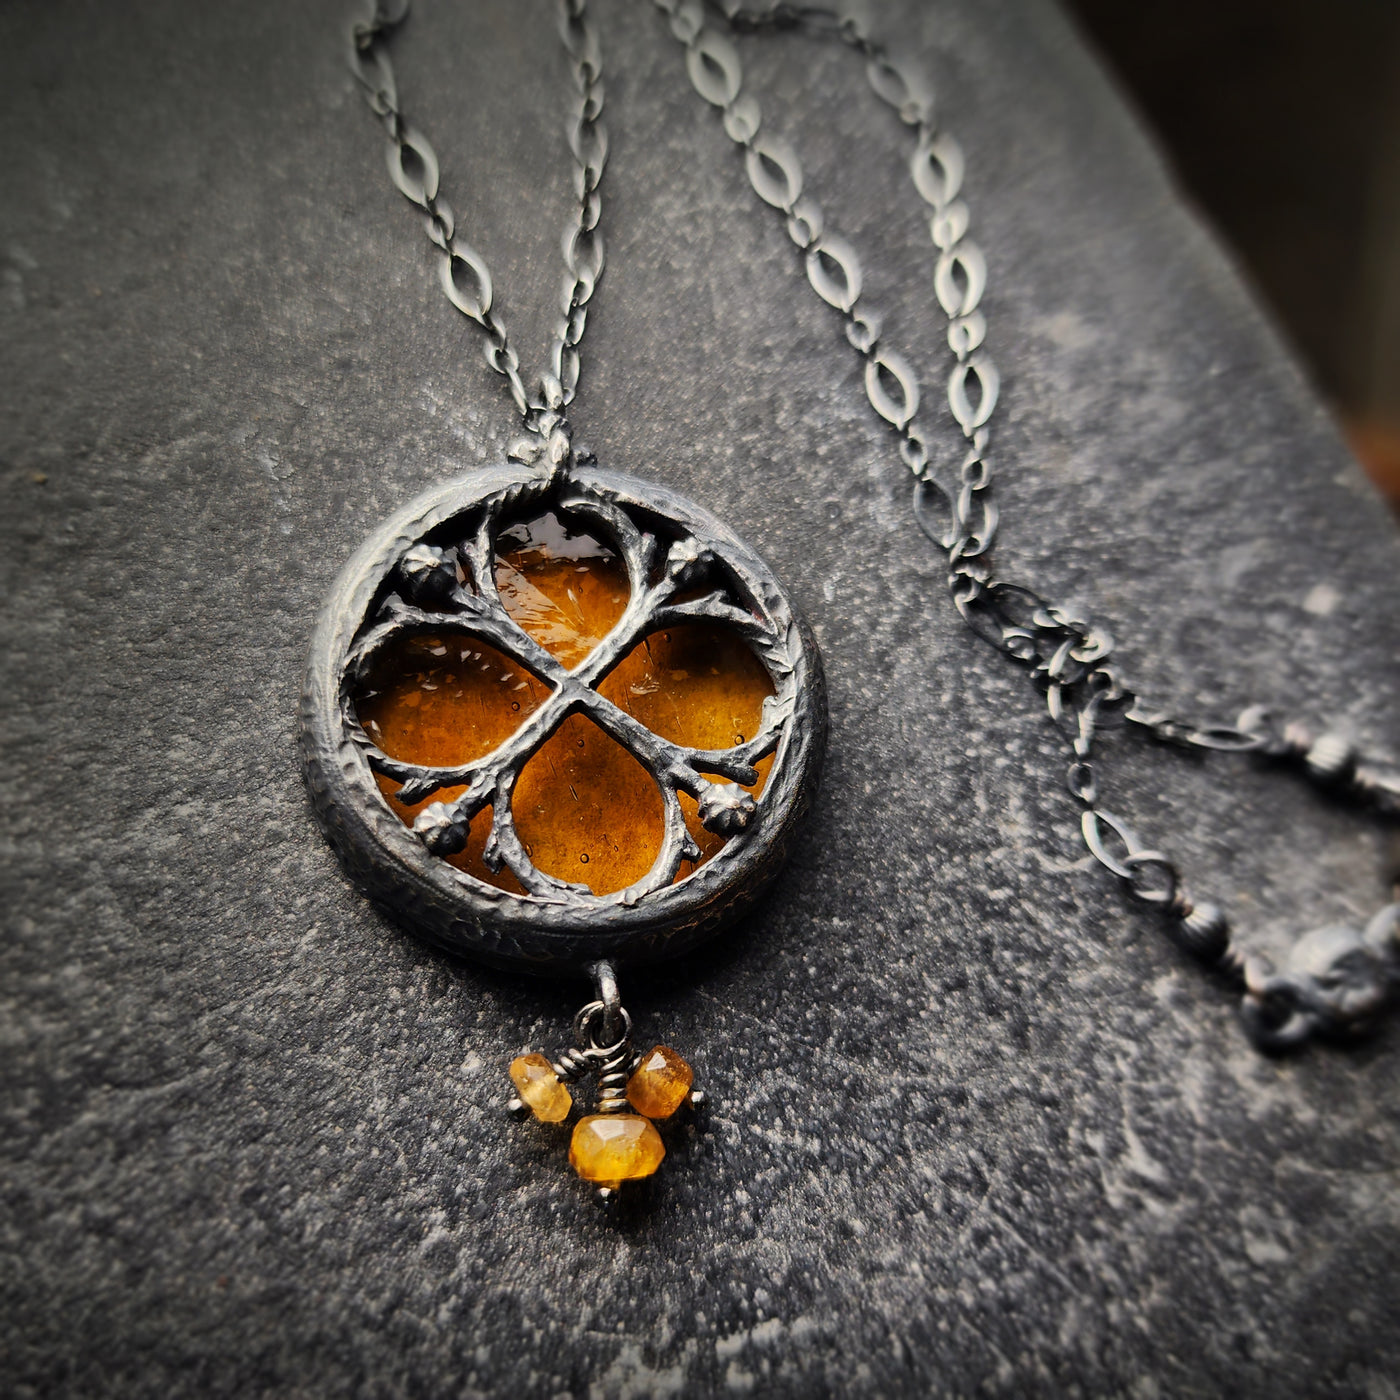 the infinity of the hive - floriated clover miracle window amulet